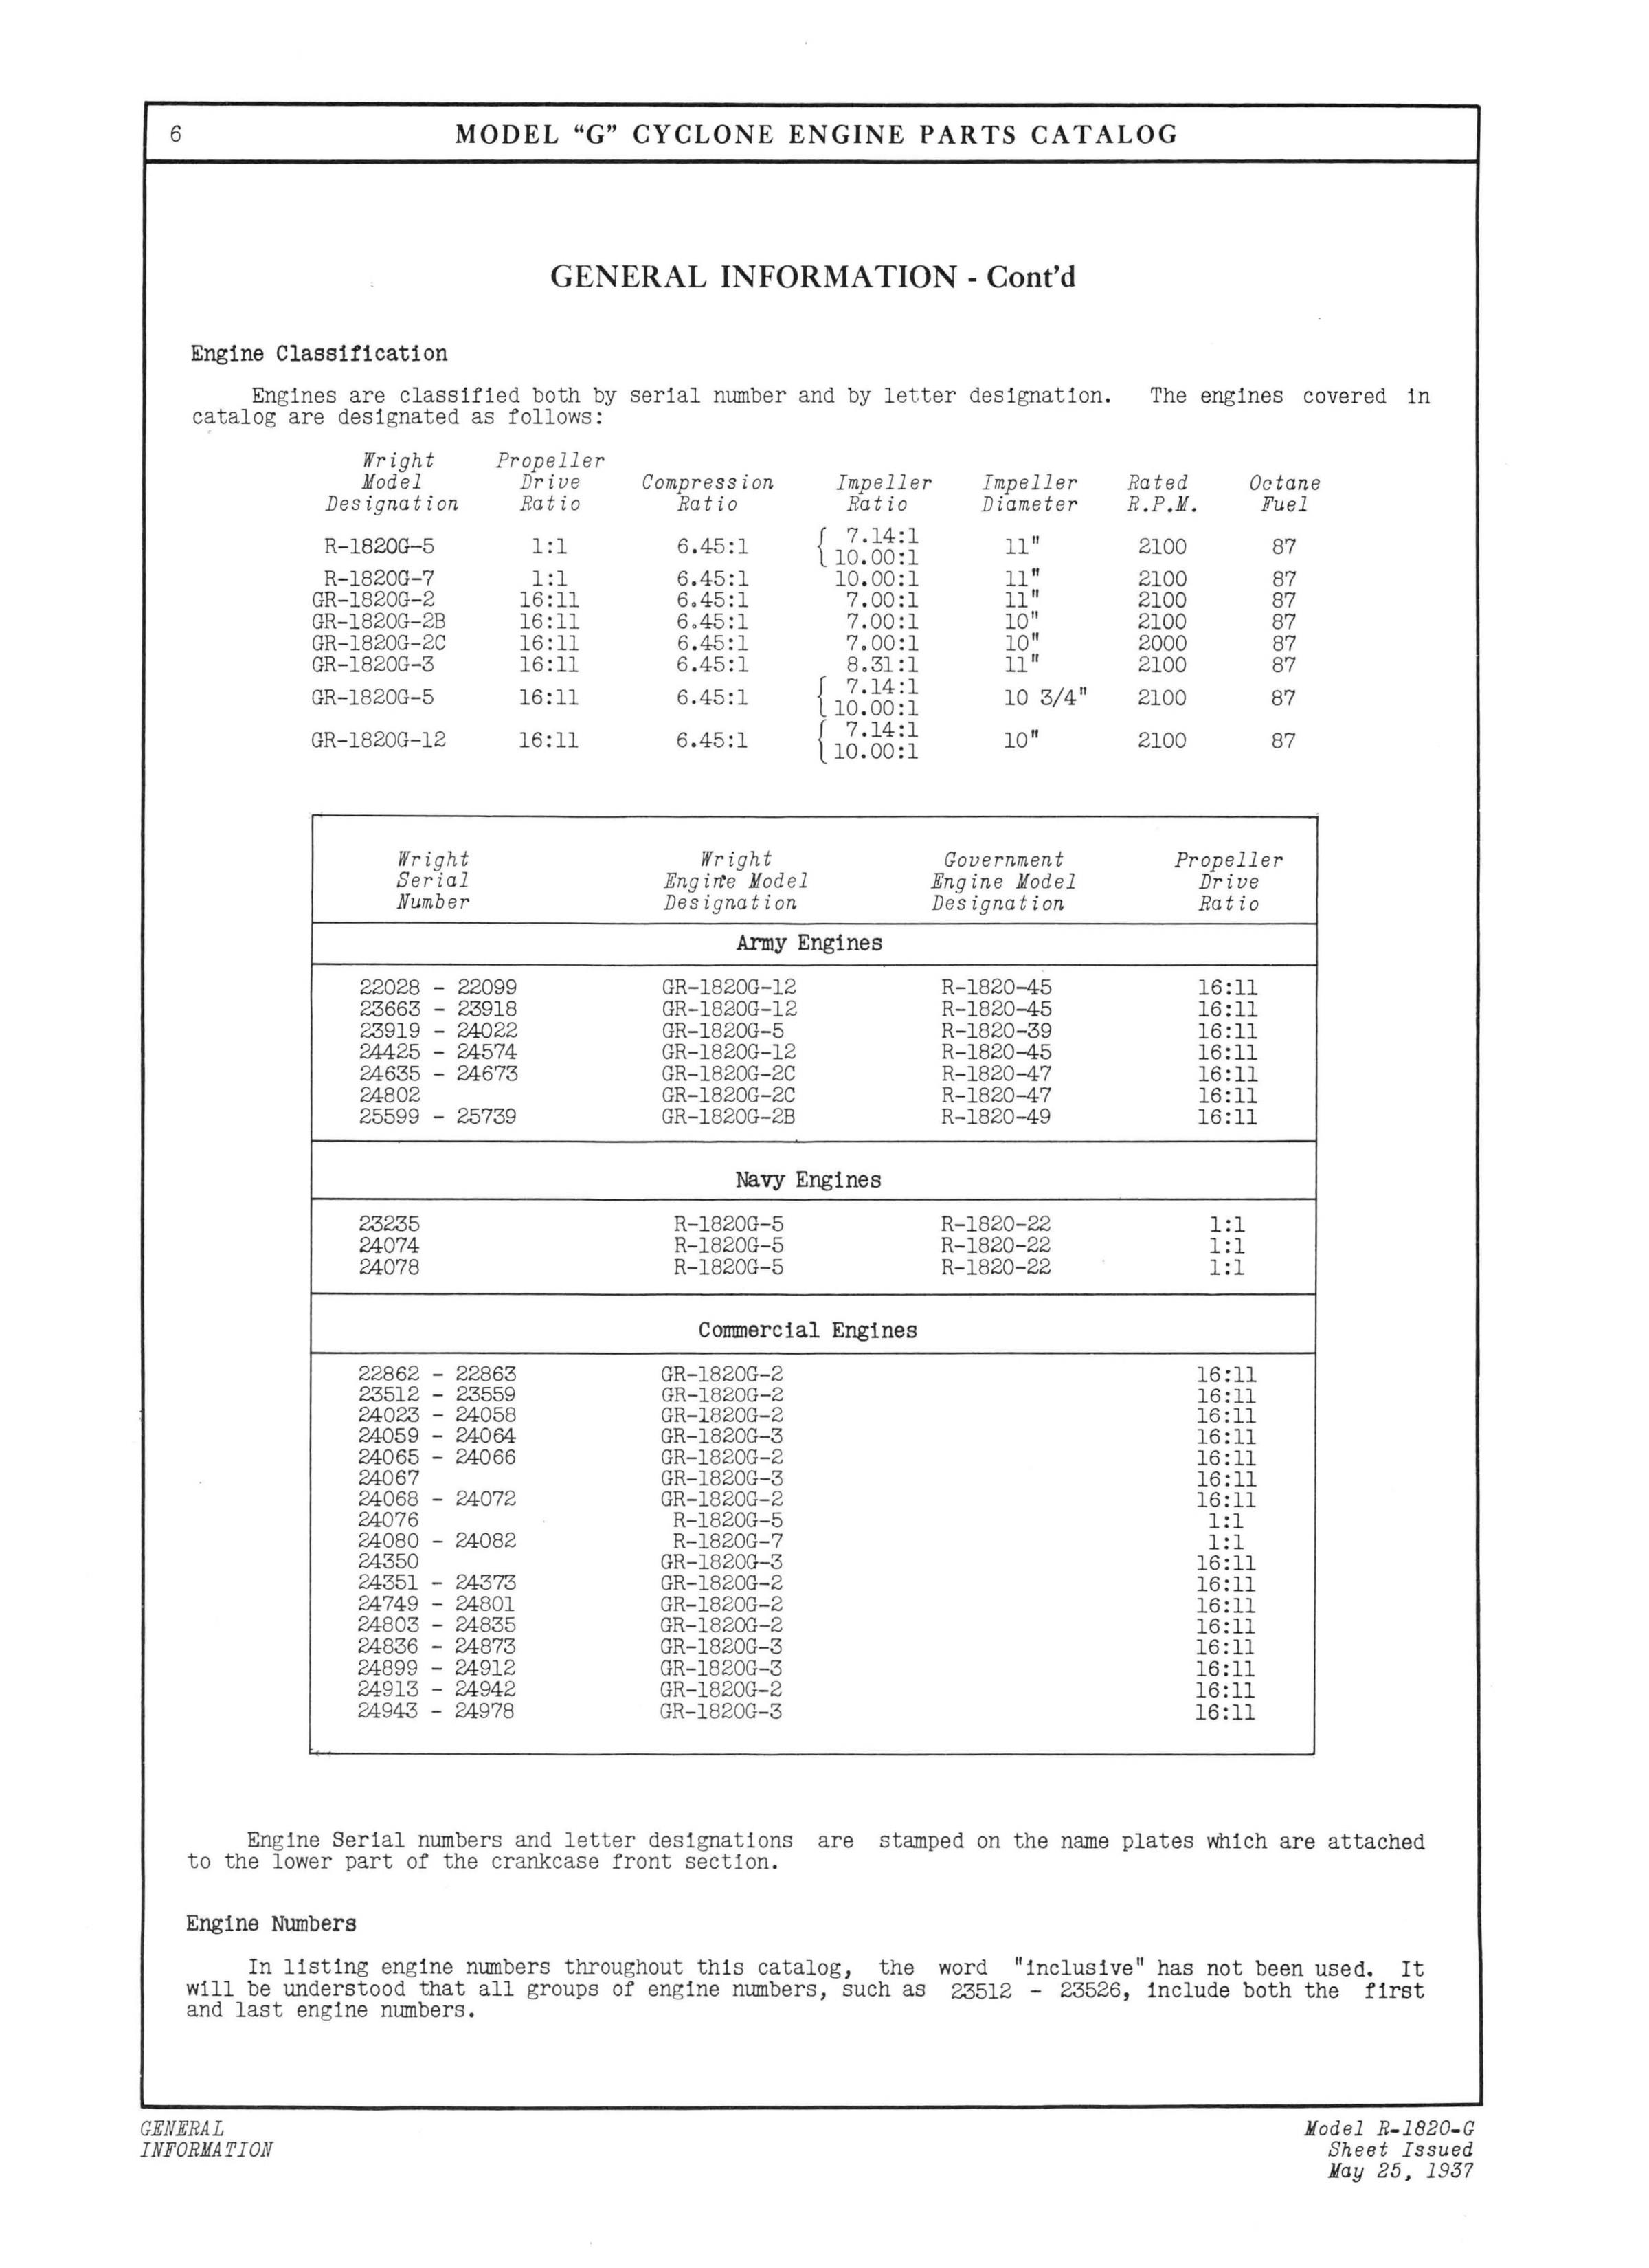 Sample page 8 from AirCorps Library document: Parts Catalog for Wright Cyclone Engines R-1820-G (Excluding -100 Series)